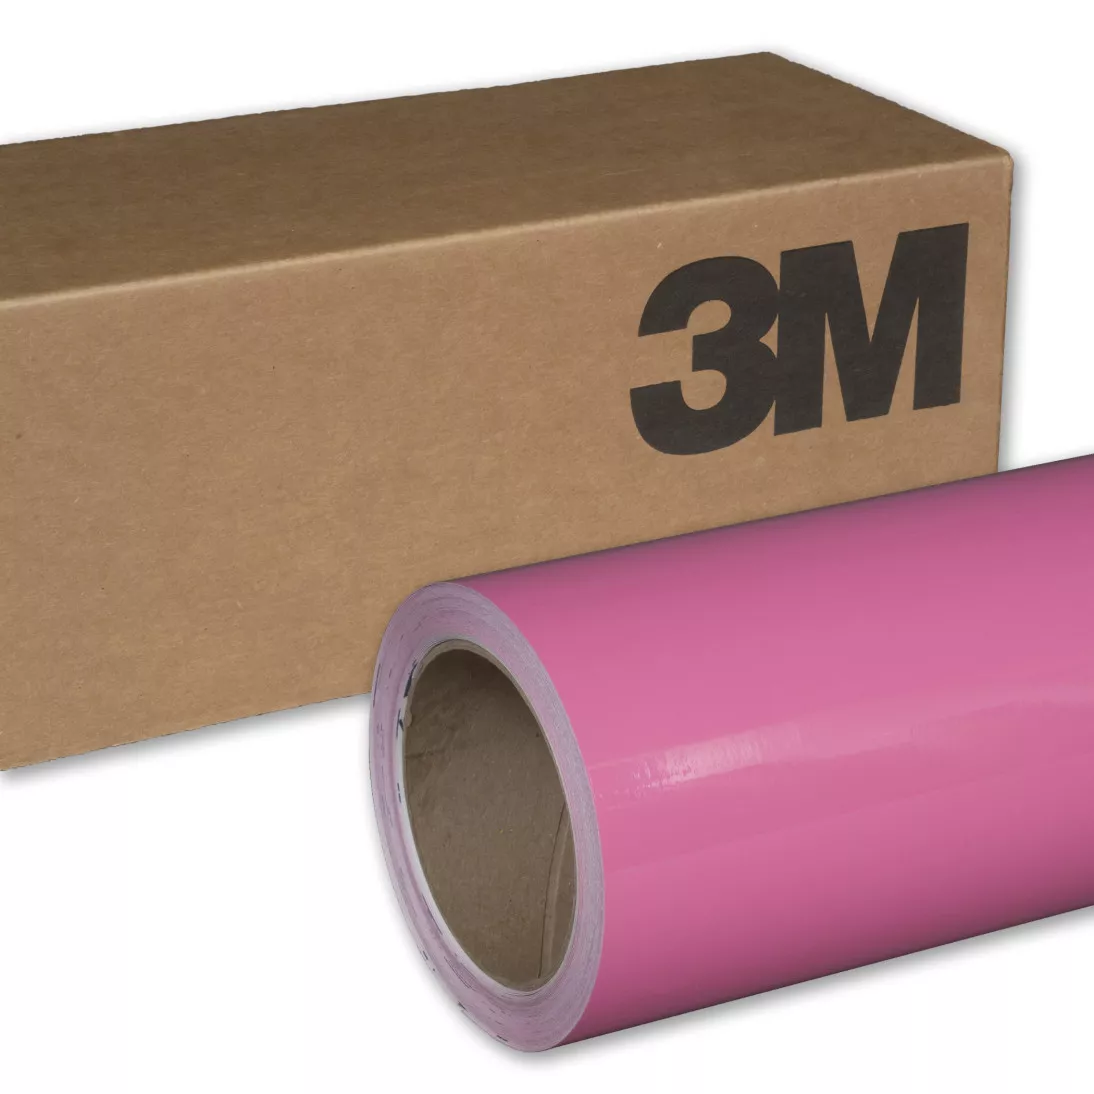 3M™ Wrap Film Series 1080-G103, Gloss Hot Pink, 60 in x 10 yd